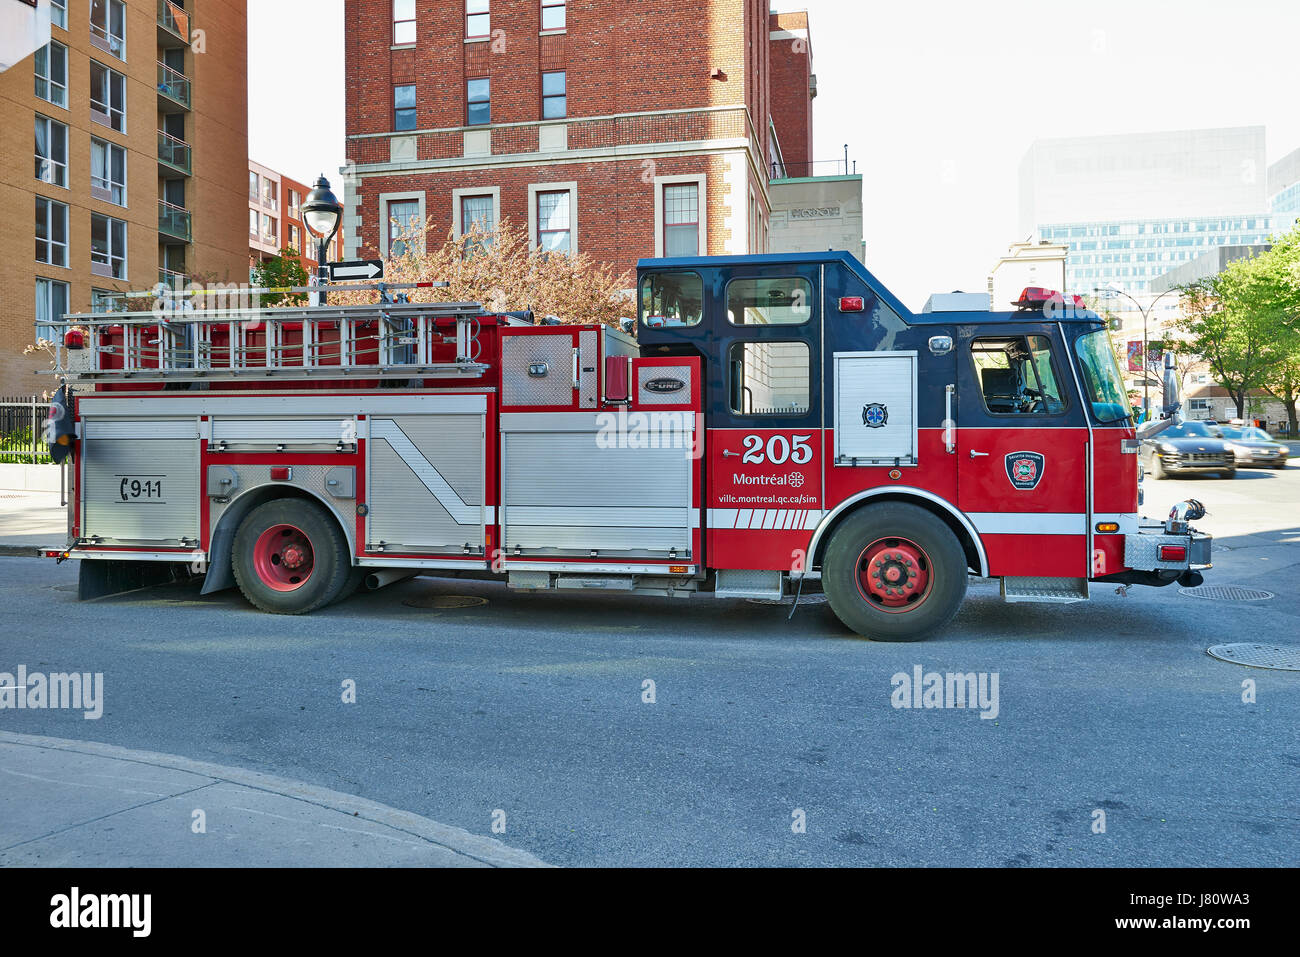 MONTREAL, QUEBEC, CANADA - 18 MAY 2017: Fire engine in Montreal Canada. Service de securite incendie de Montreal the SIM is the 7th largest fire depar Stock Photo